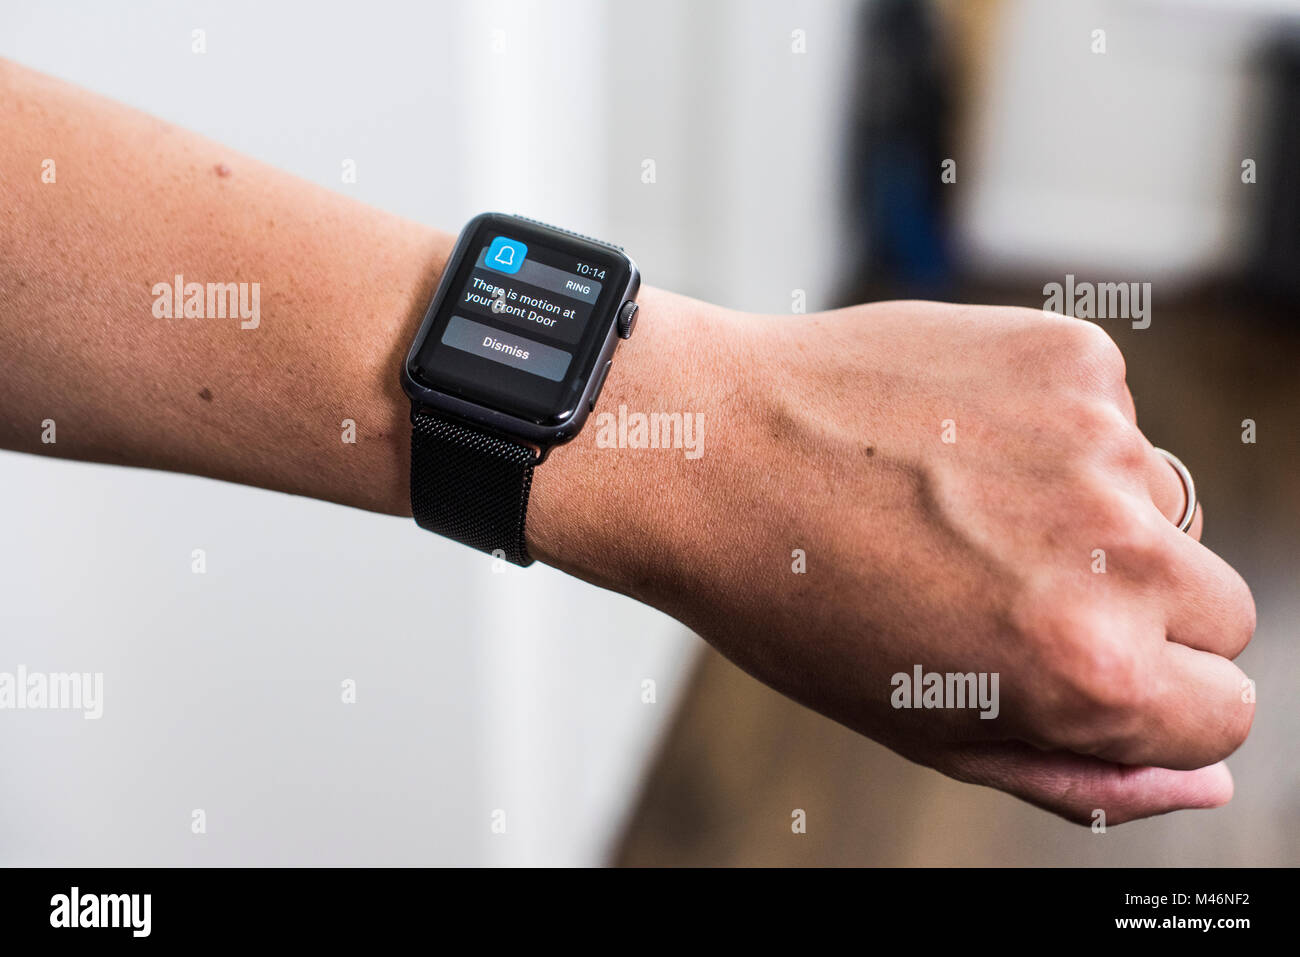 Smart watch technology alerting homeowner of activity at his front door. Stock Photo